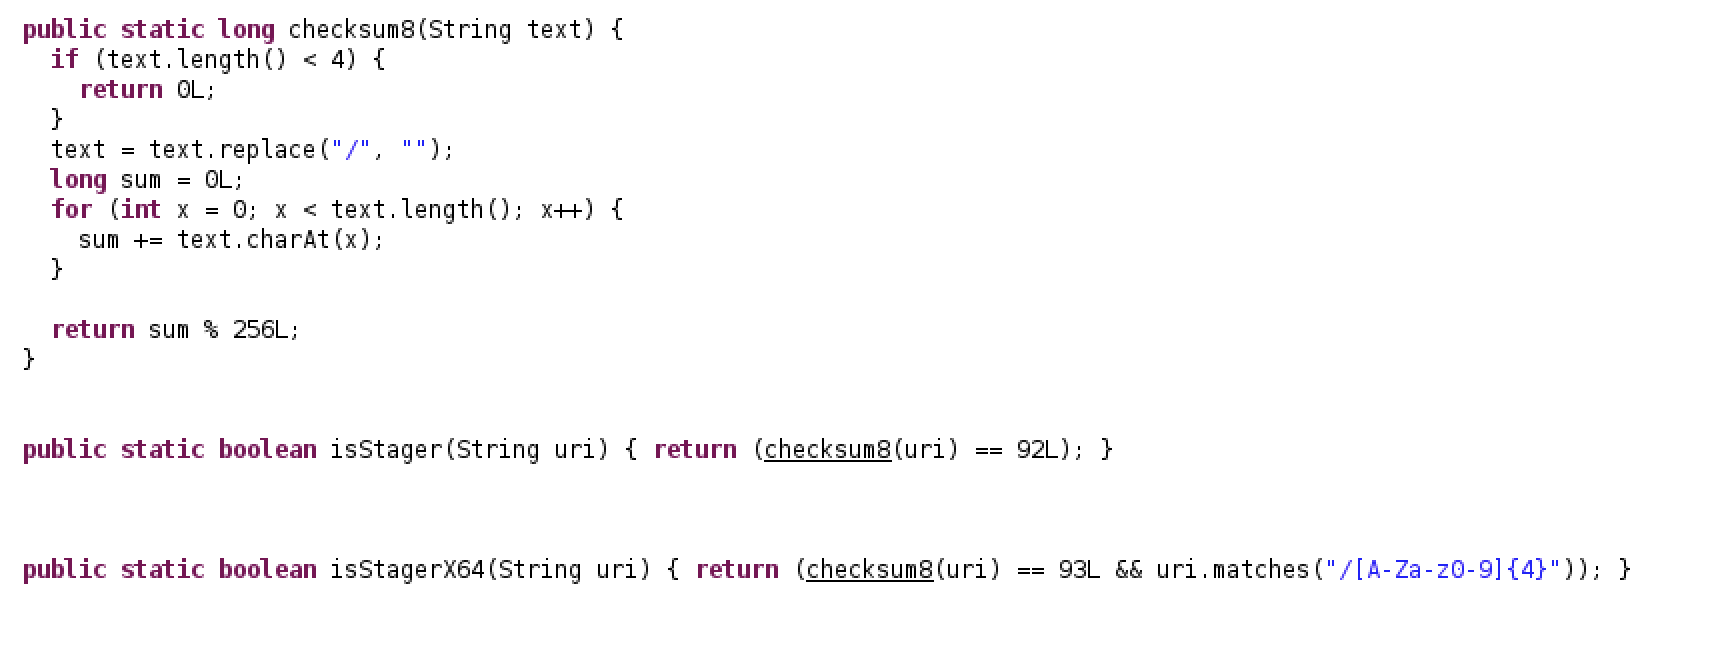 Image showing code to check the URI checksum. For 32-bit payloads, the code compares the URI checksum result to the literal integer 92L. For 64-bit payload requests, the algorithm compares the checksum to 93L.